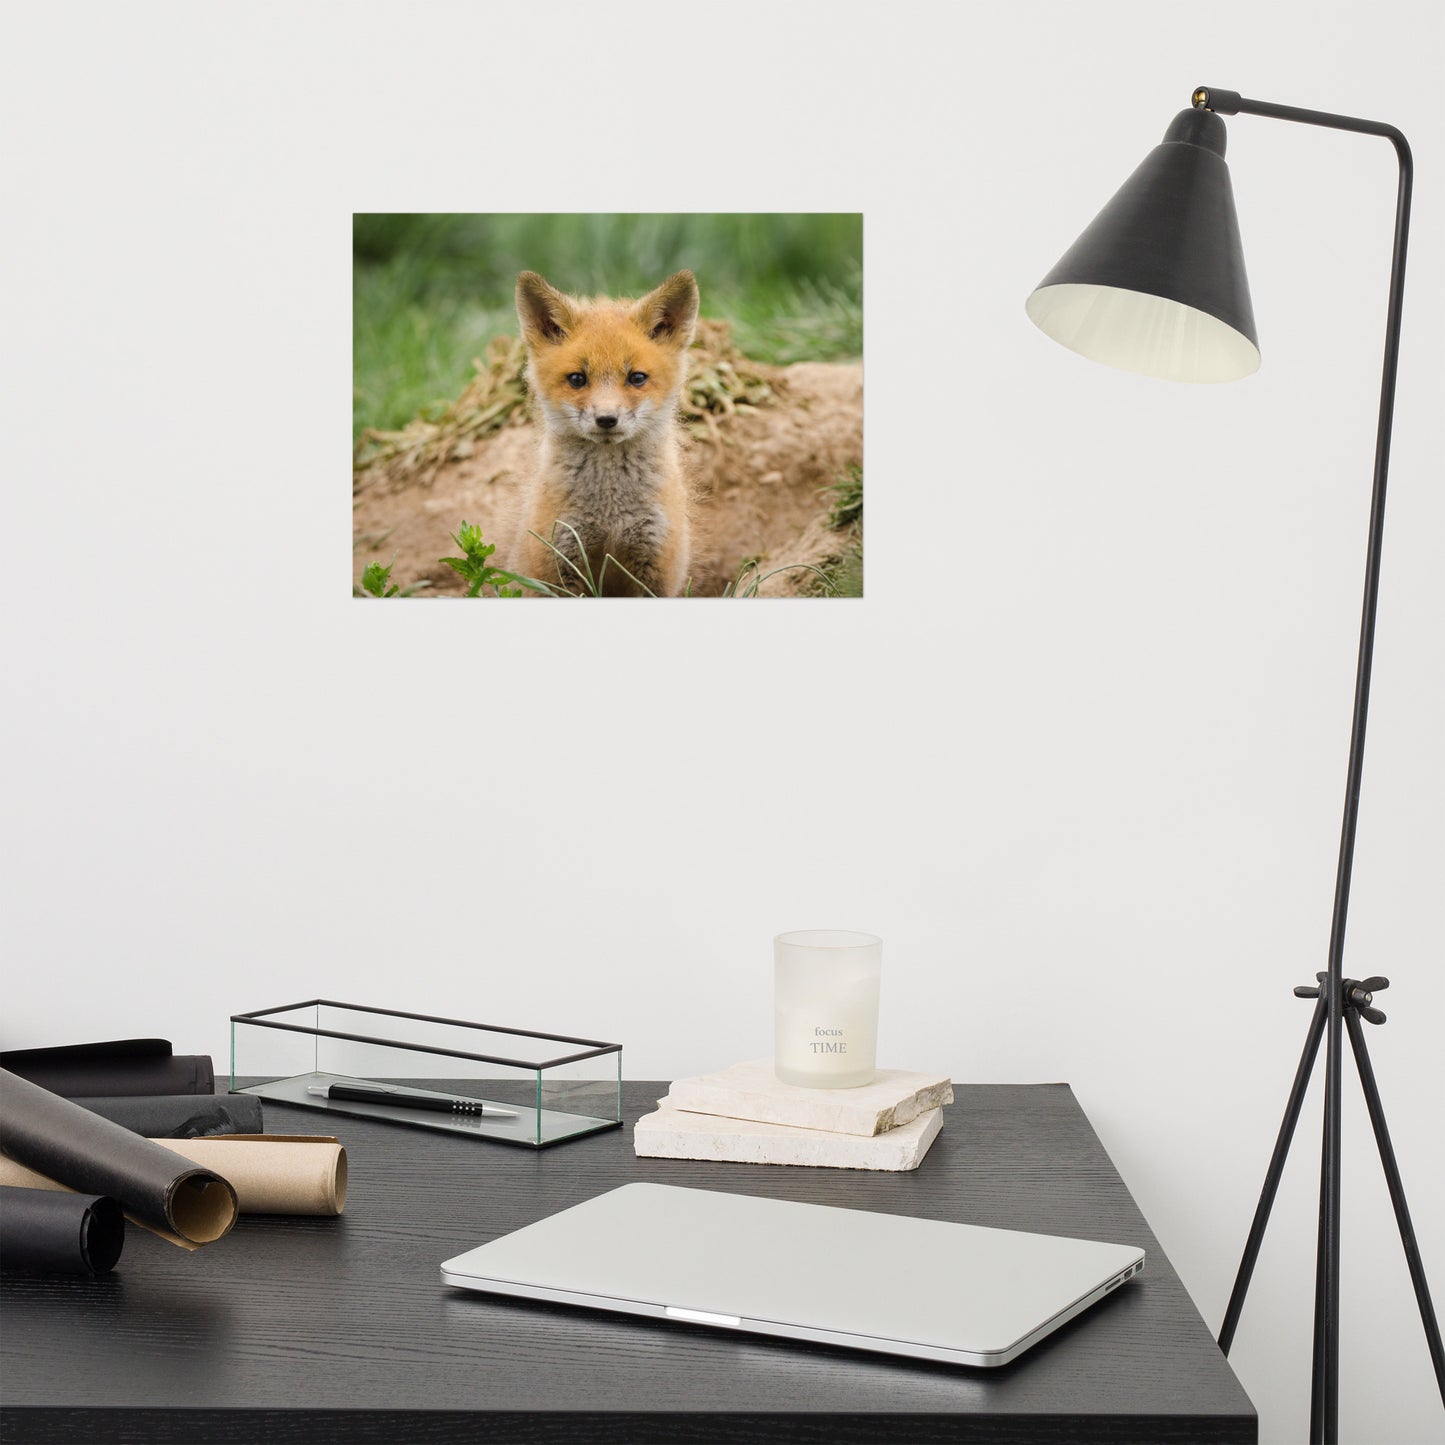 Bathroom Wall Art Pictures: Young Red Fox Kit - Animal / Wildlife / Nature Photograph Loose / Unframed / Frameless / Frameable Wall Art Print / Artwork